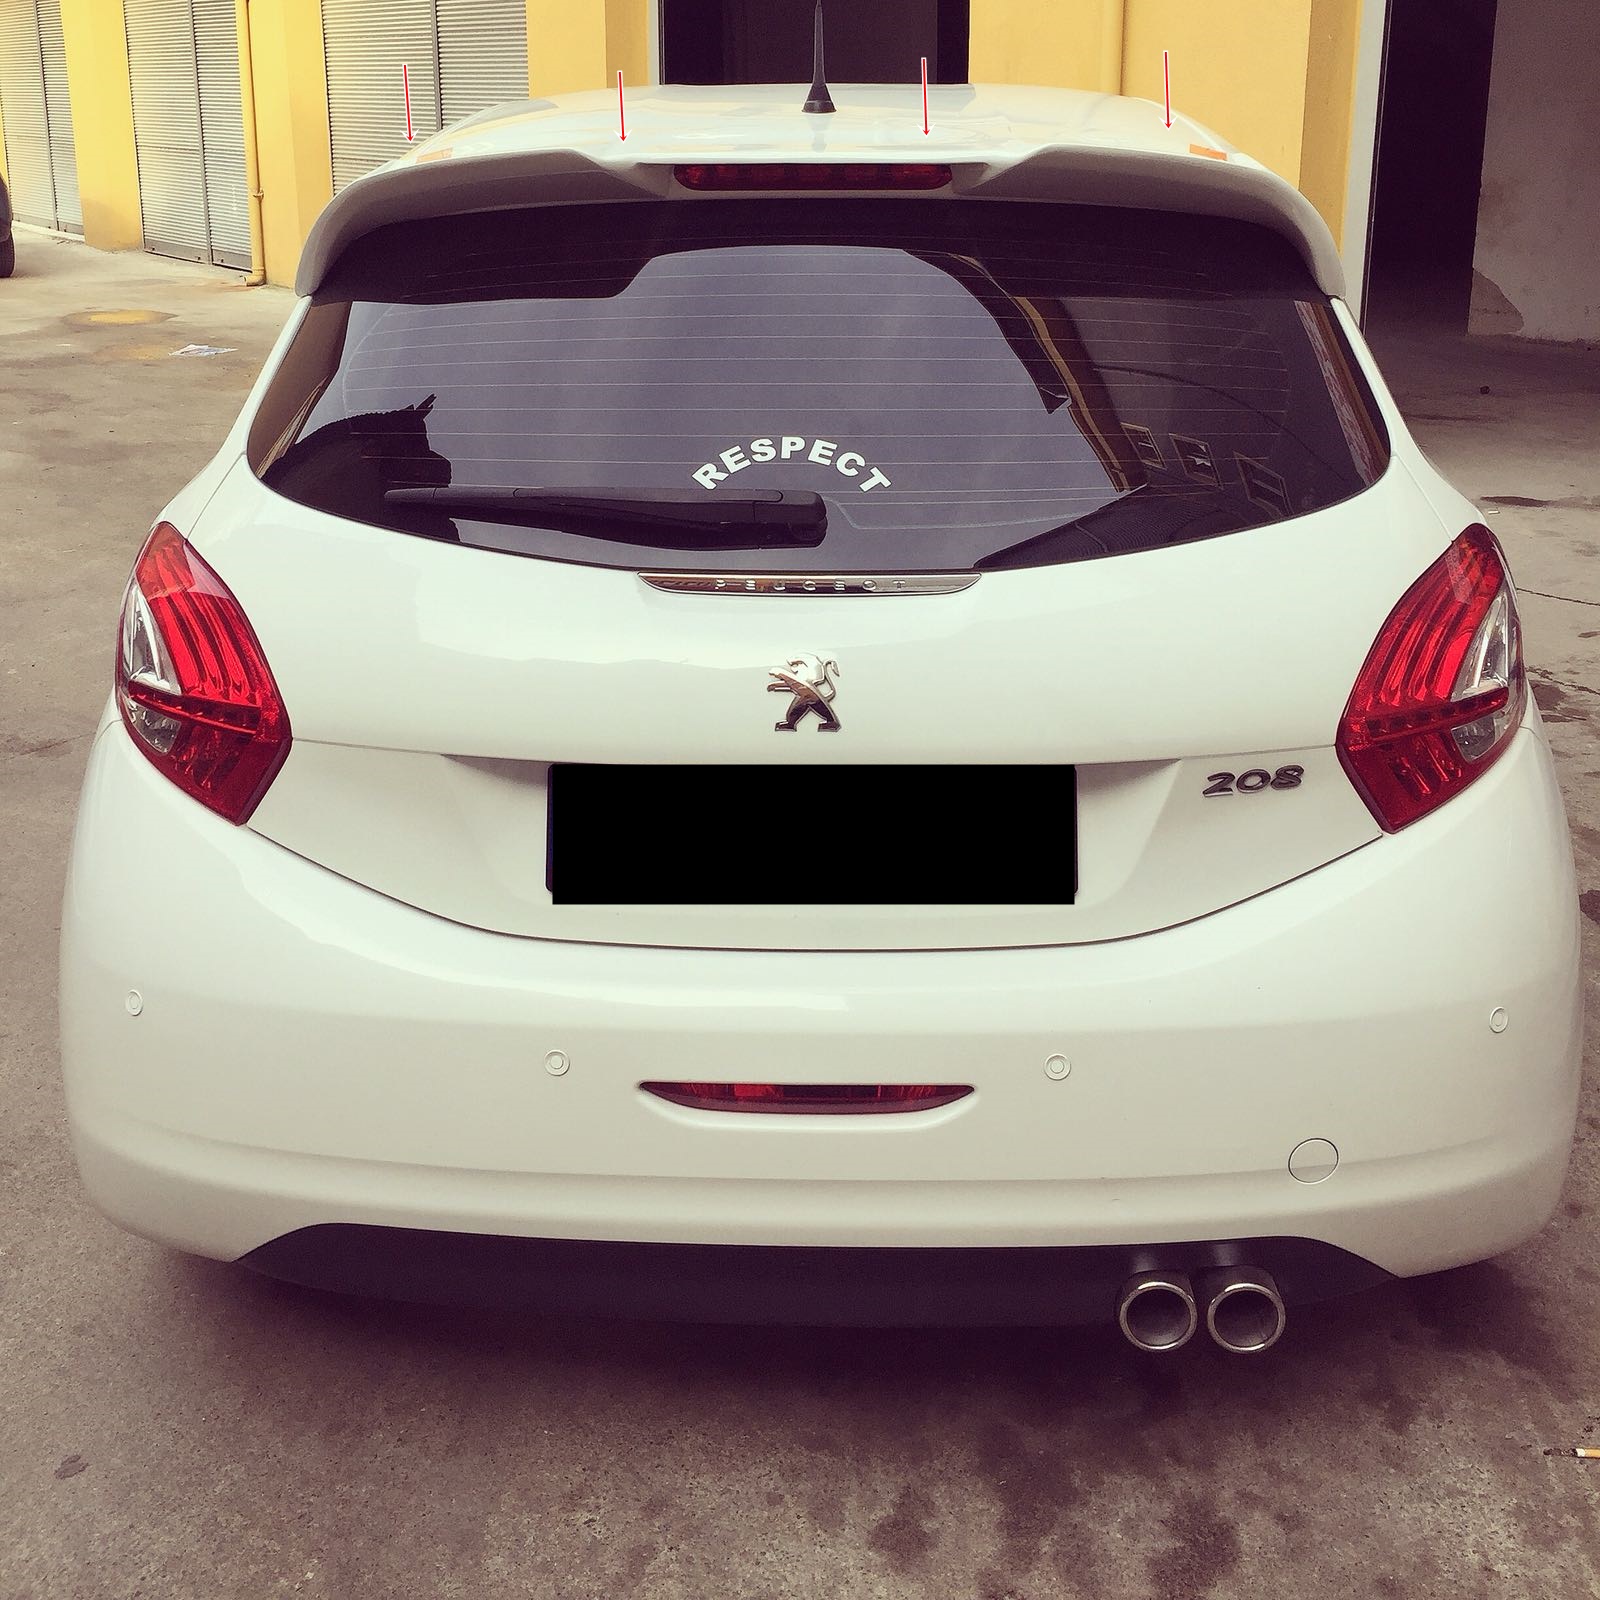 PEUGEOT 208 Model Spoiler Piano Black and White Universal Luggage Top  Sporty Appearance Ornament Accessories - Price history & Review, AliExpress Seller - Doctors Garage Store